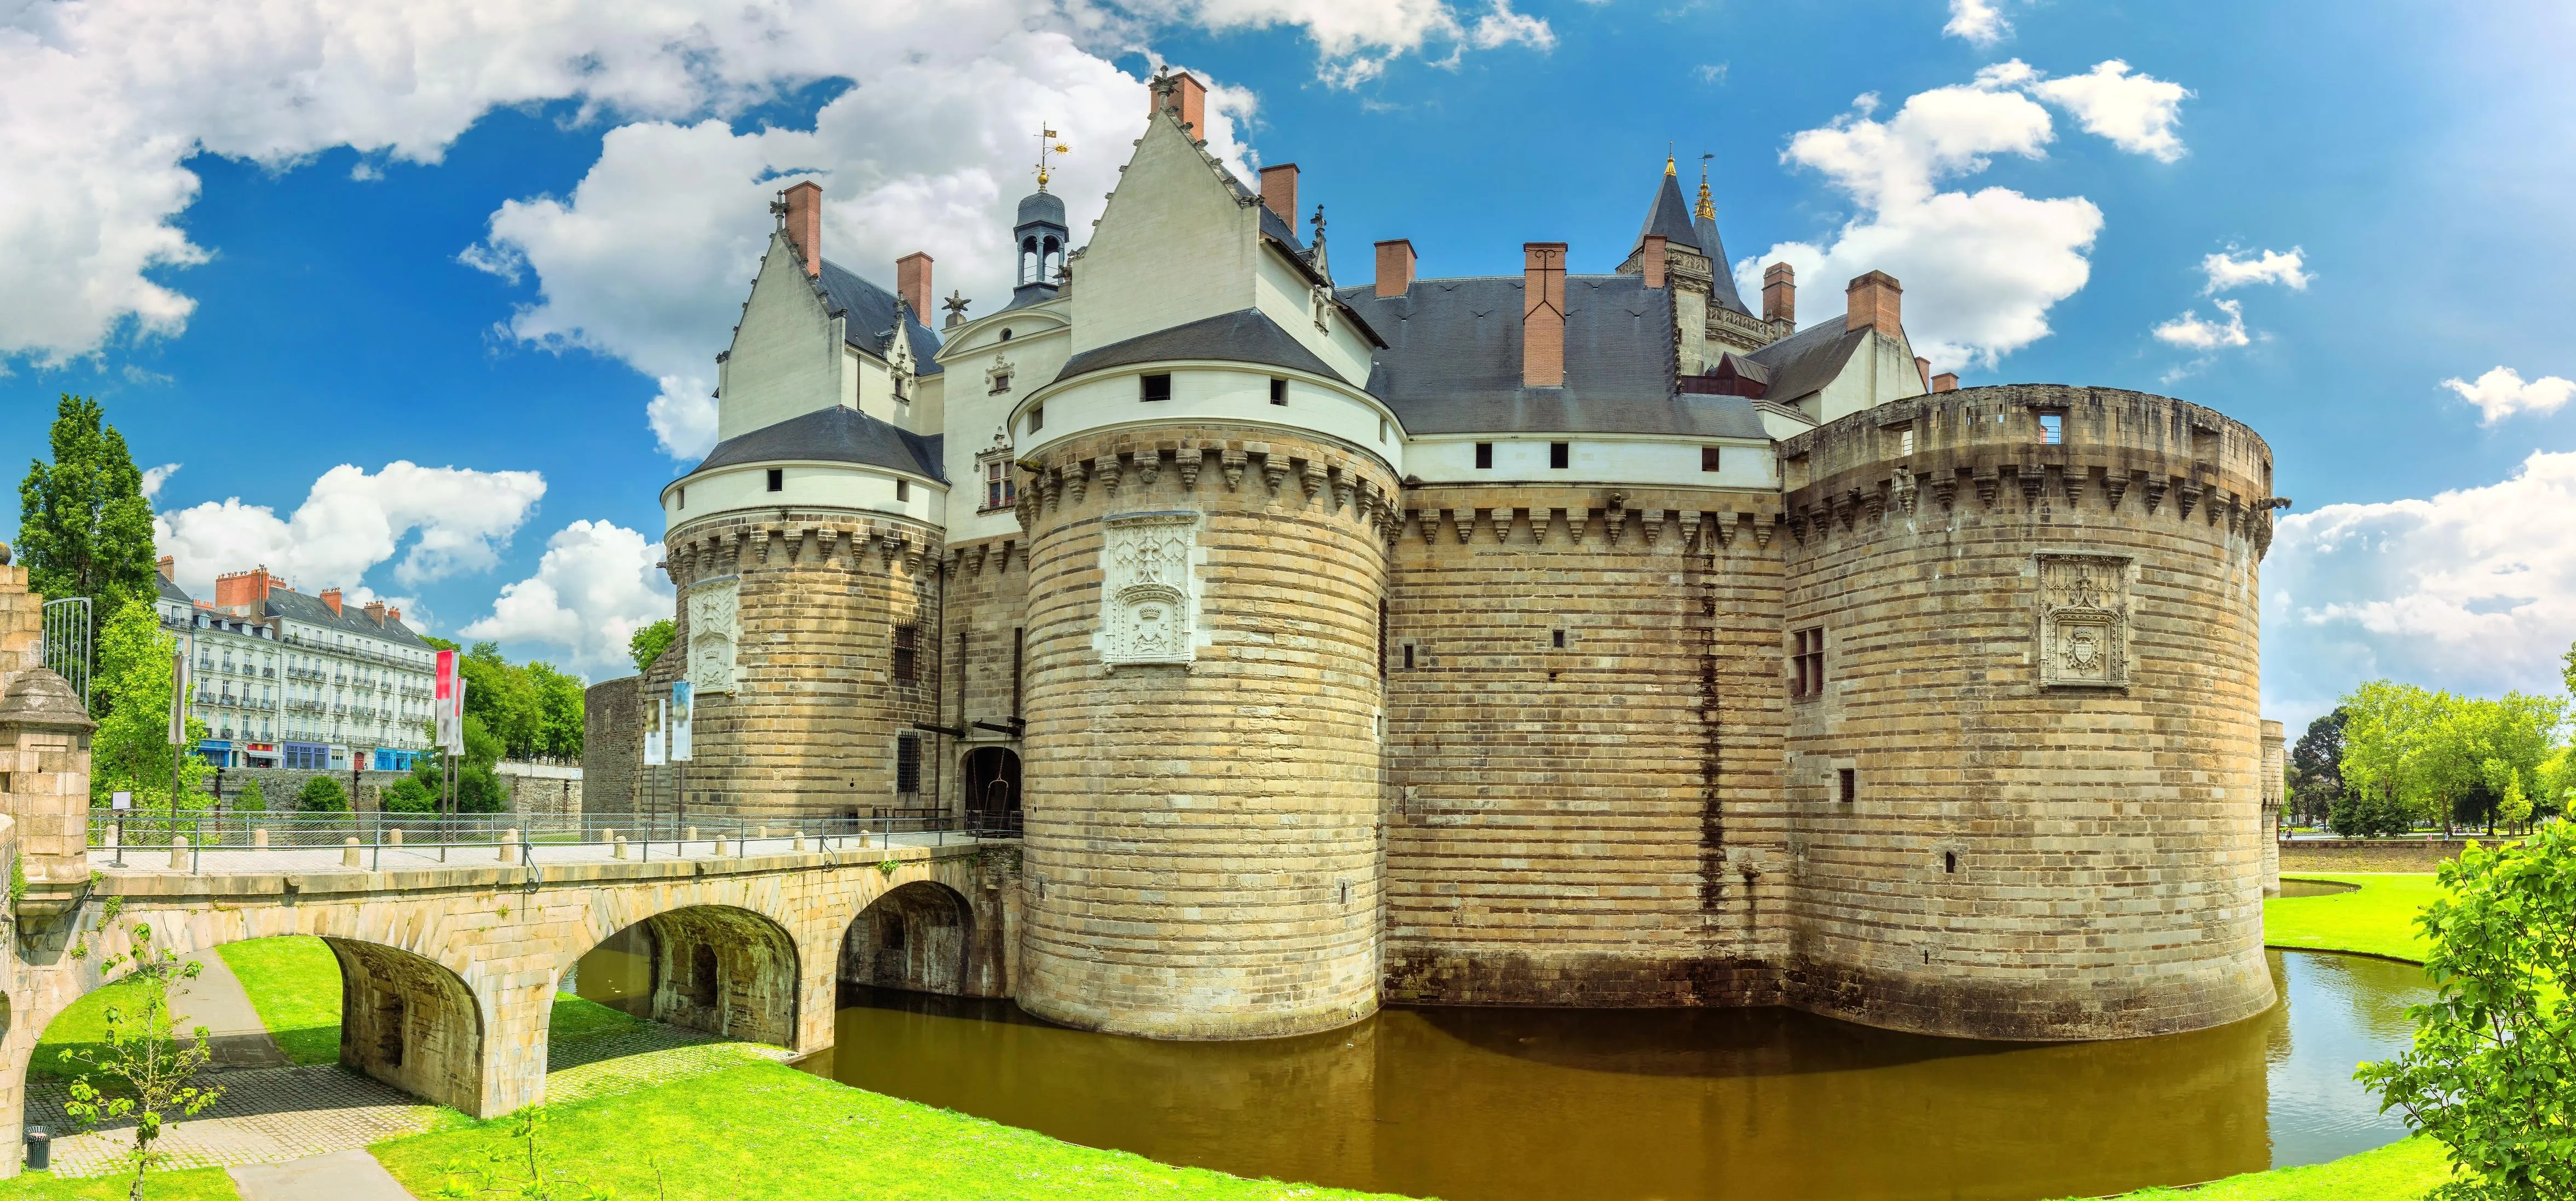 Castle of the Dukes of Brittany in France, Europe | Castles - Rated 4.5